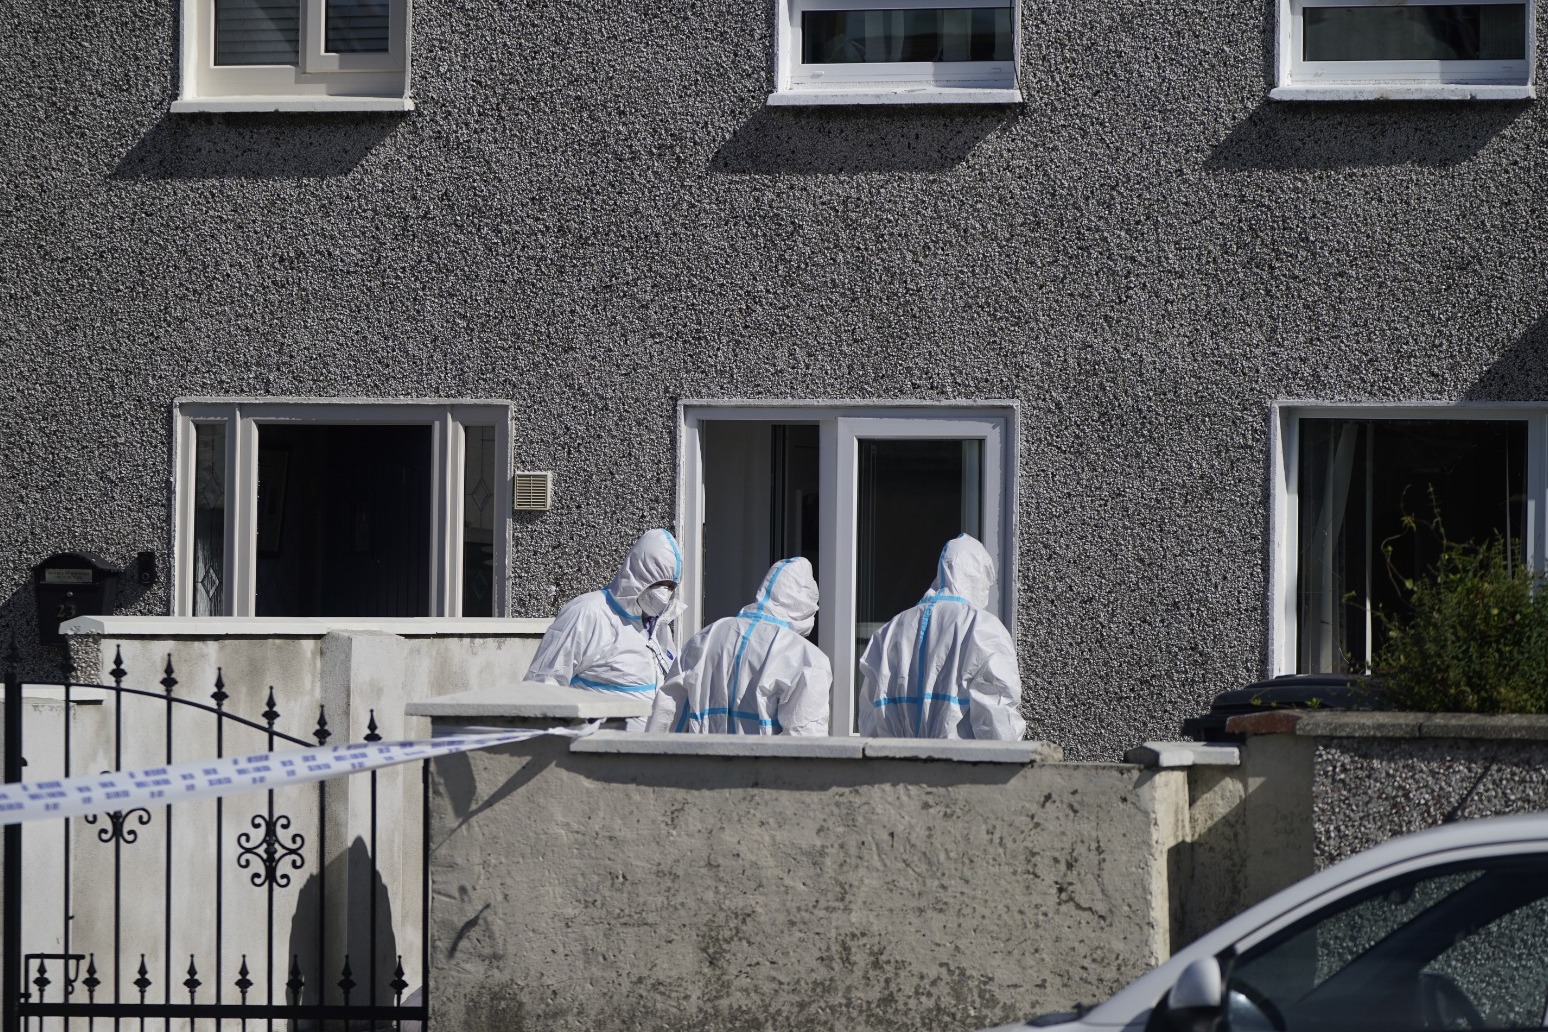 Three siblings killed in violent incident at house in Dublin 